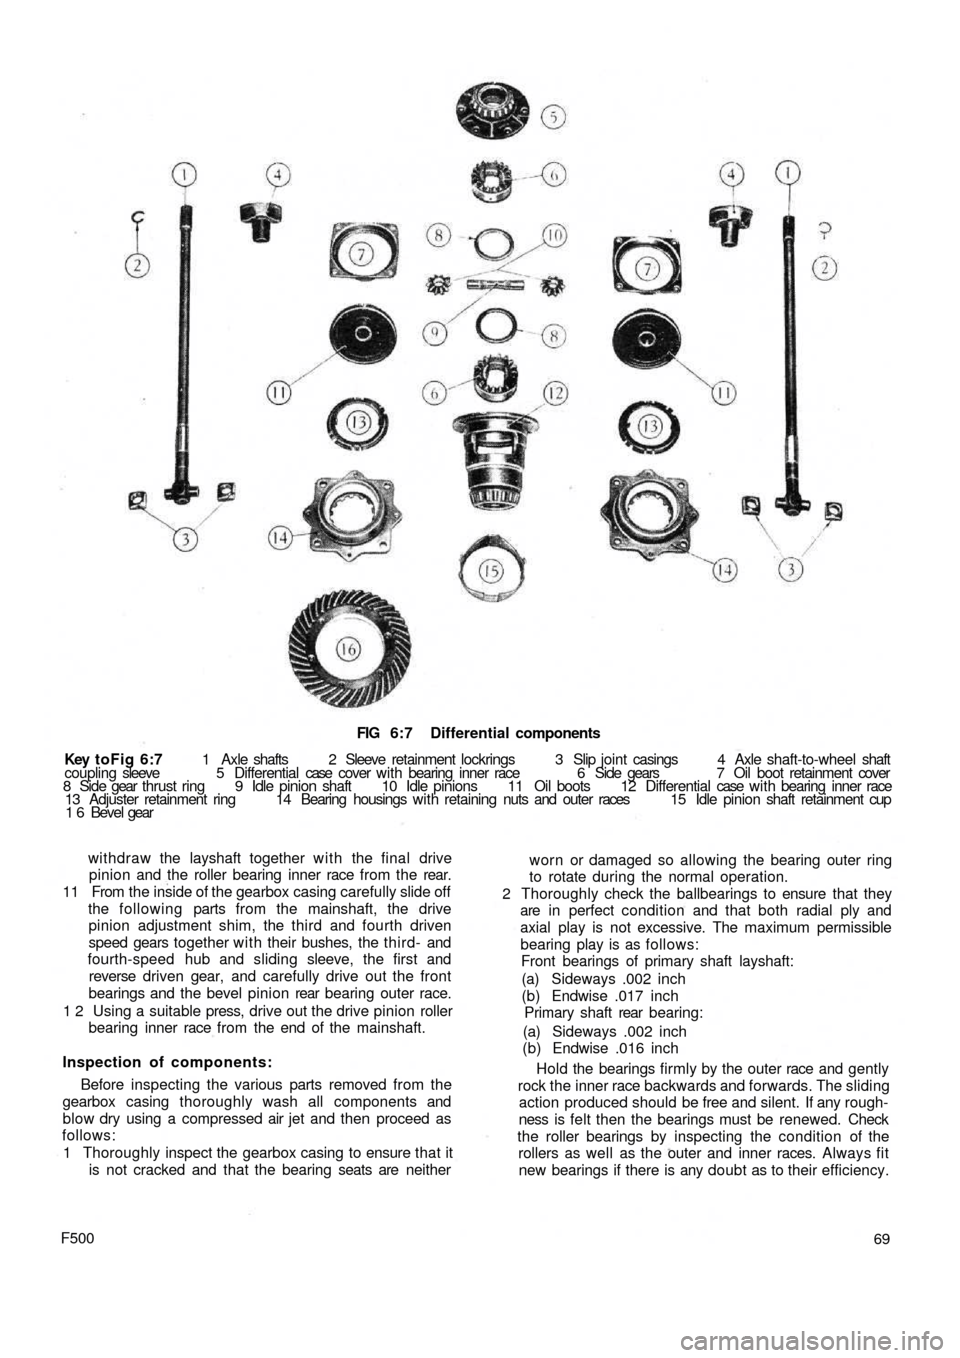 FIAT 500 1964 1.G Repair Manual FIG 6:7  Differential components
Key toFig  6:7 1  Axle  shafts  2  Sleeve  retainment  lockrings   3   Slip  joint casings  4  Axle  shaft-to-wheel shaft
coupling sleeve  5  Differential case  cover 